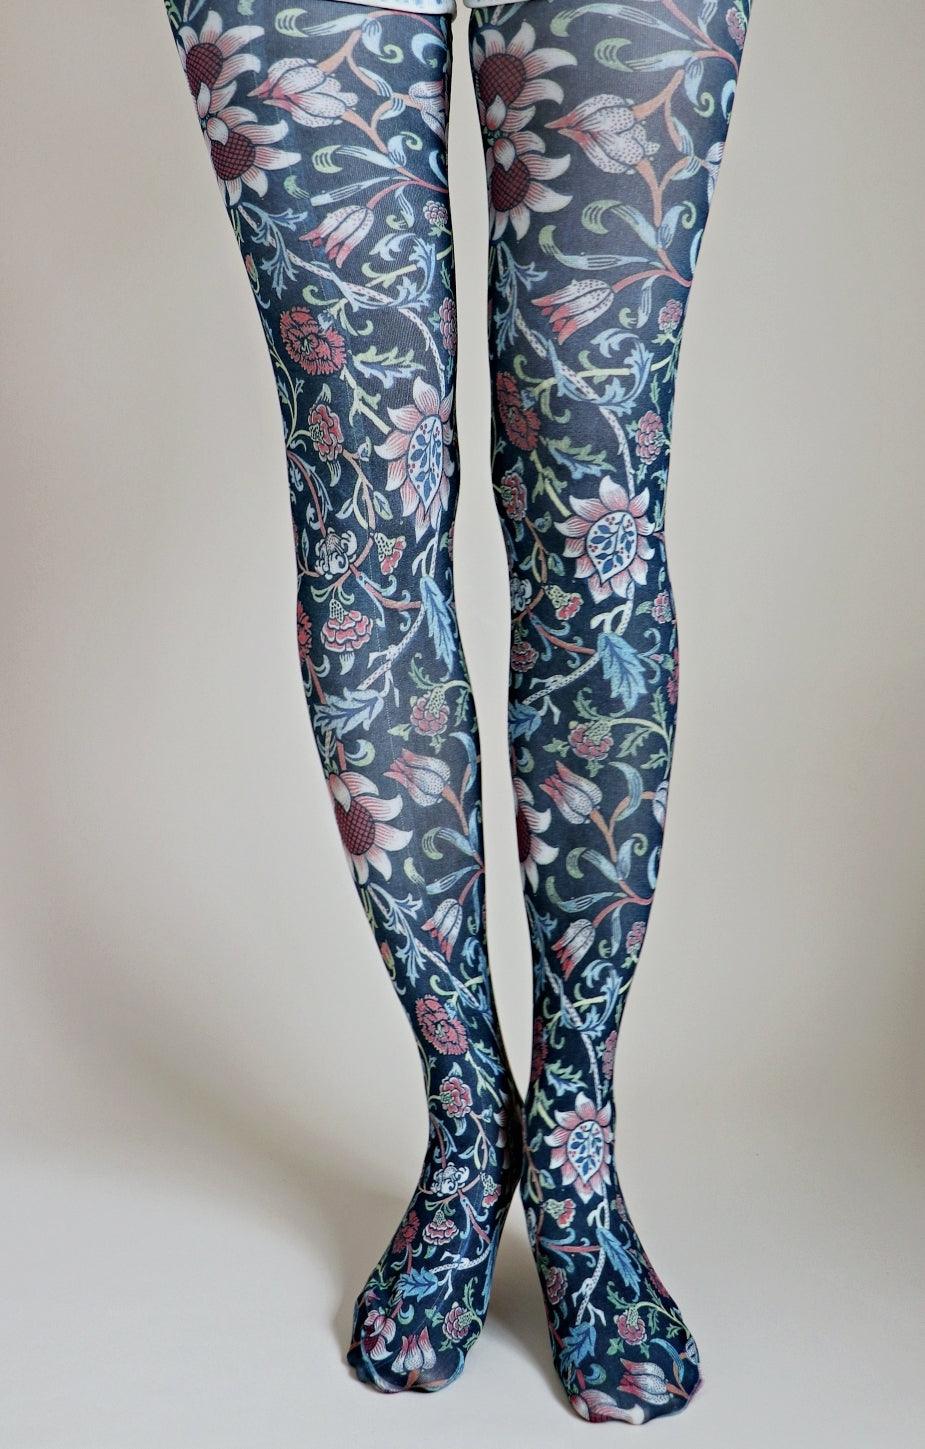 Evenlode by William Morris | Printed Tights - Tabbisocks - The Sock Monster